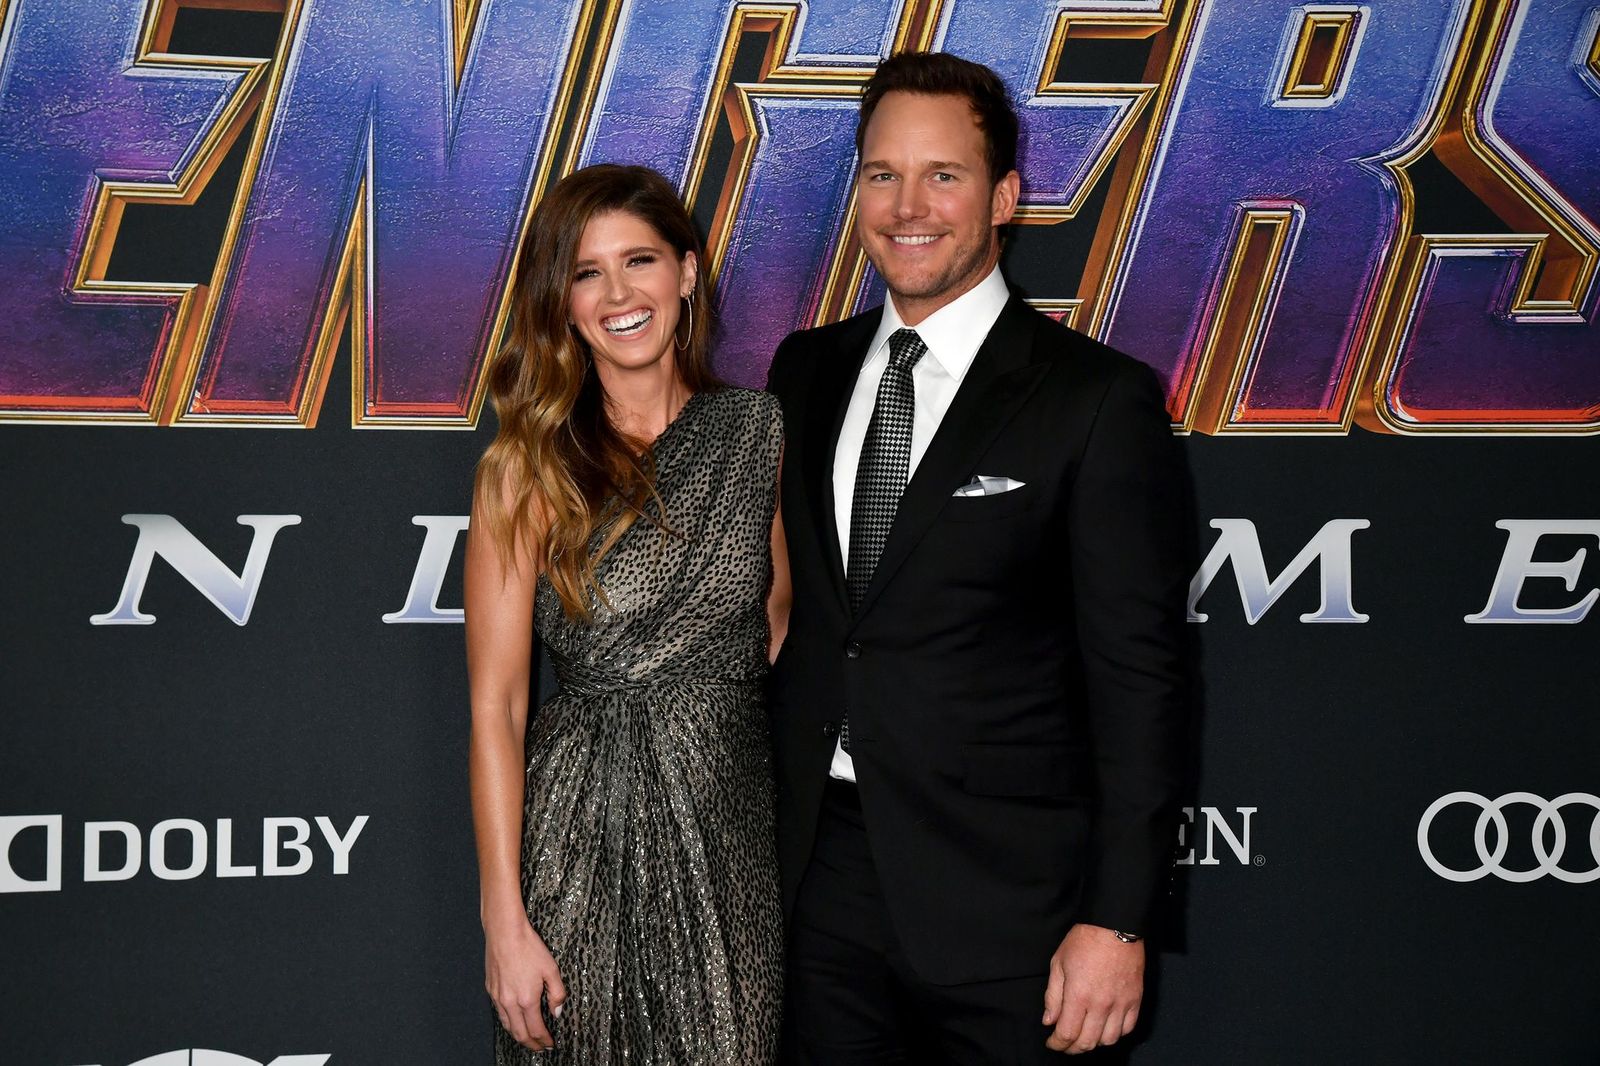  Katherine Schwarzenegger and Chris Pratt at the World Premiere of Walt Disney Studios Motion Pictures "Avengers: Endgame" at Los Angeles Convention Center on April 22, 2019 | Photo: Getty Images